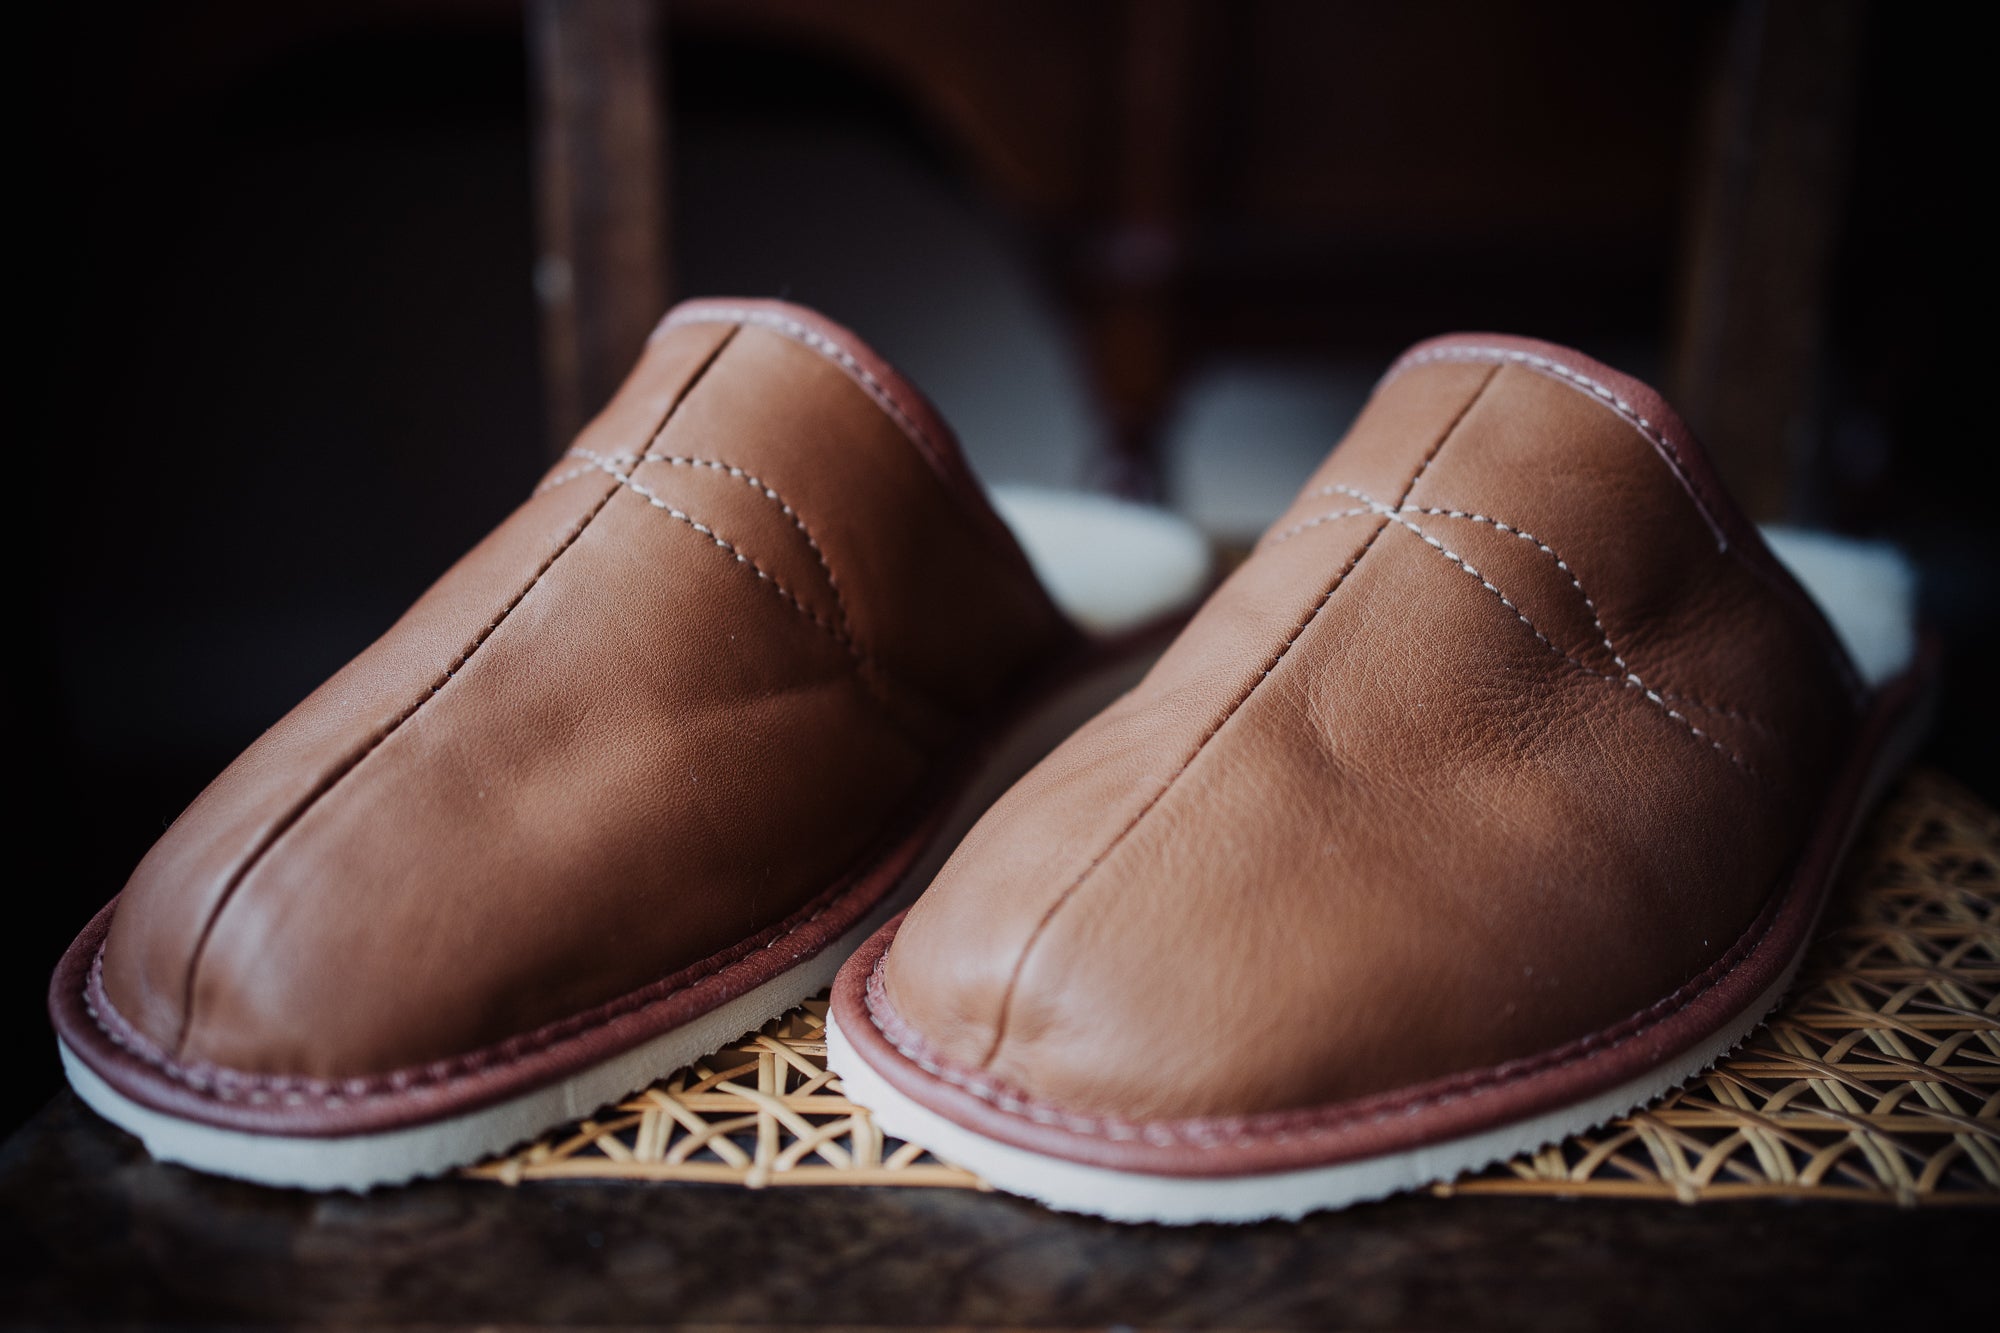 High quality men's slippers featuring soft leather and cozy wool lining, showcased on a stylish chair.